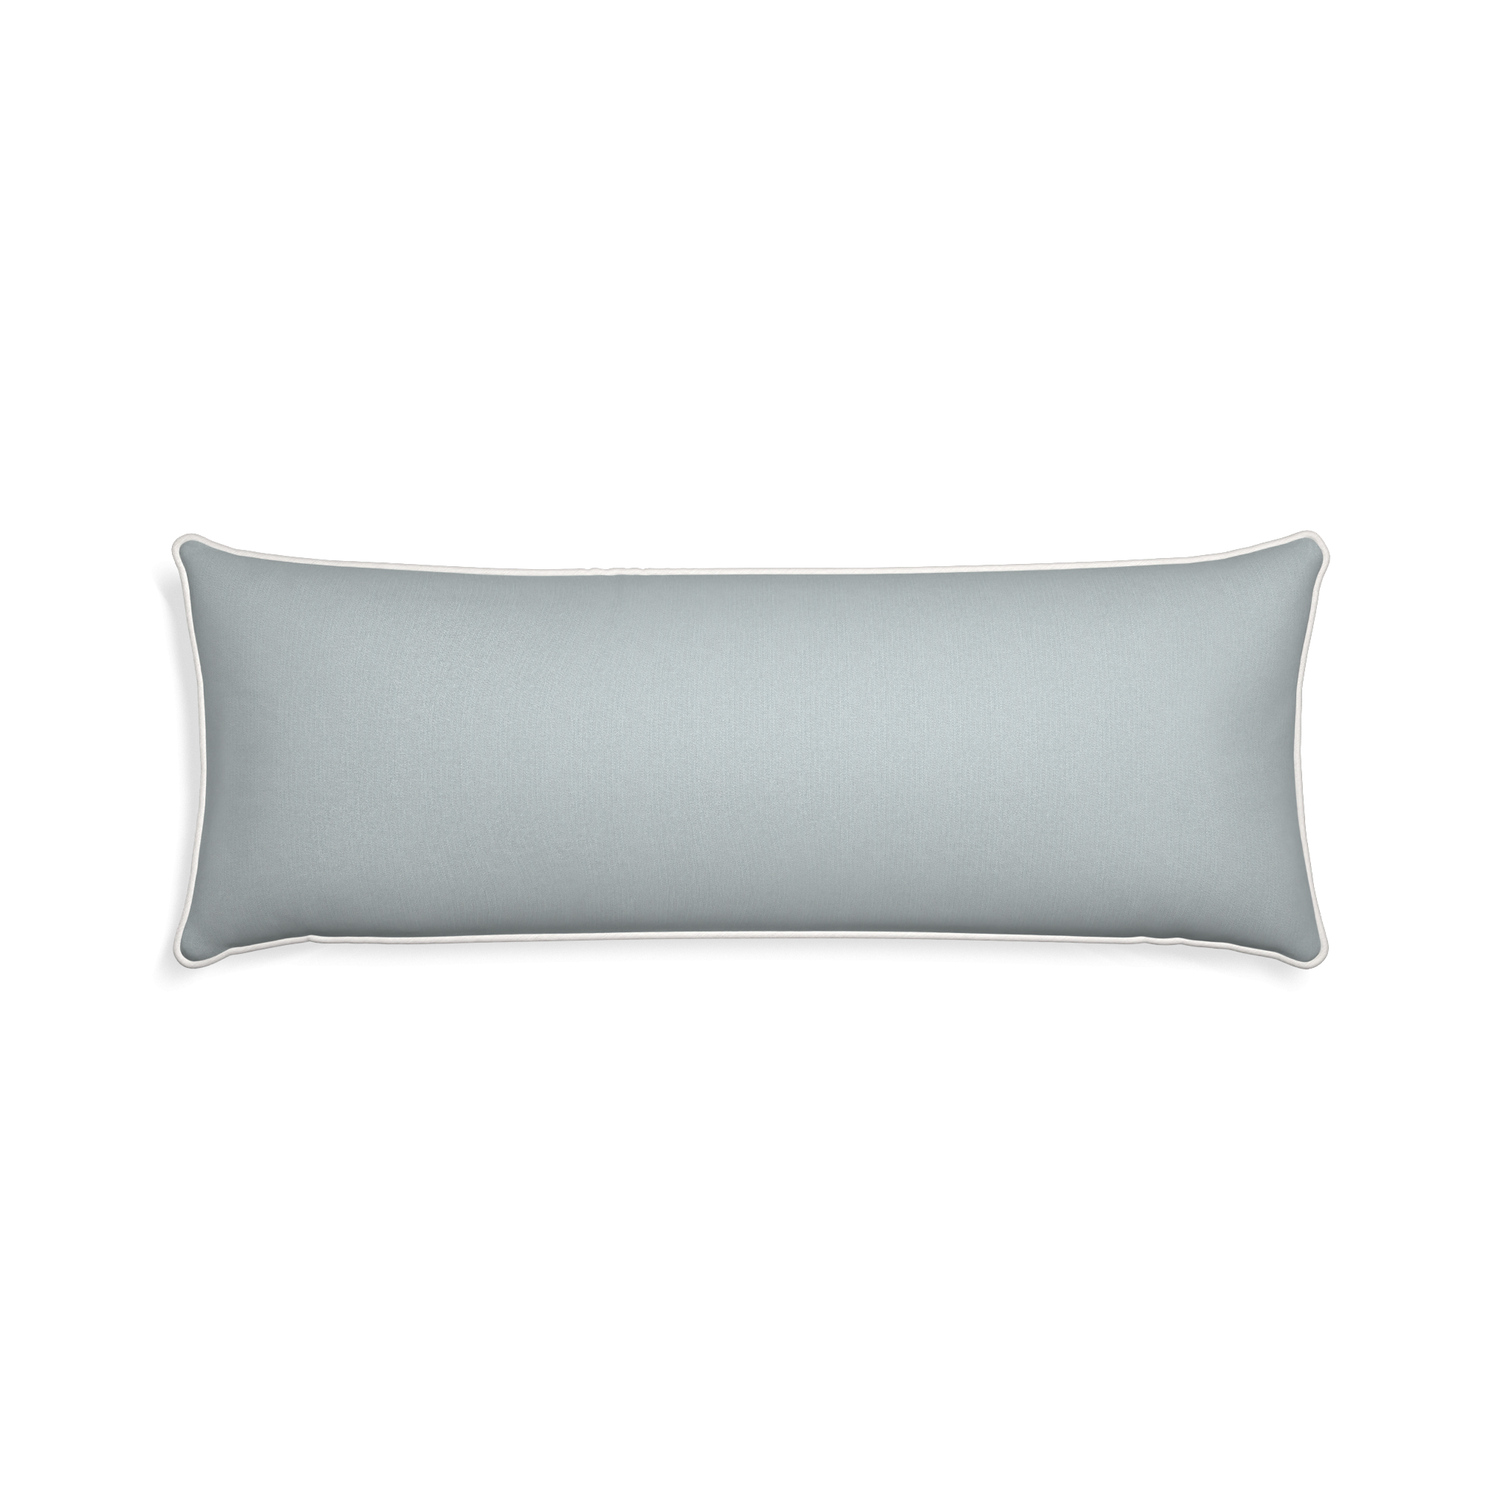 Xl-lumbar sea custom grey bluepillow with snow piping on white background